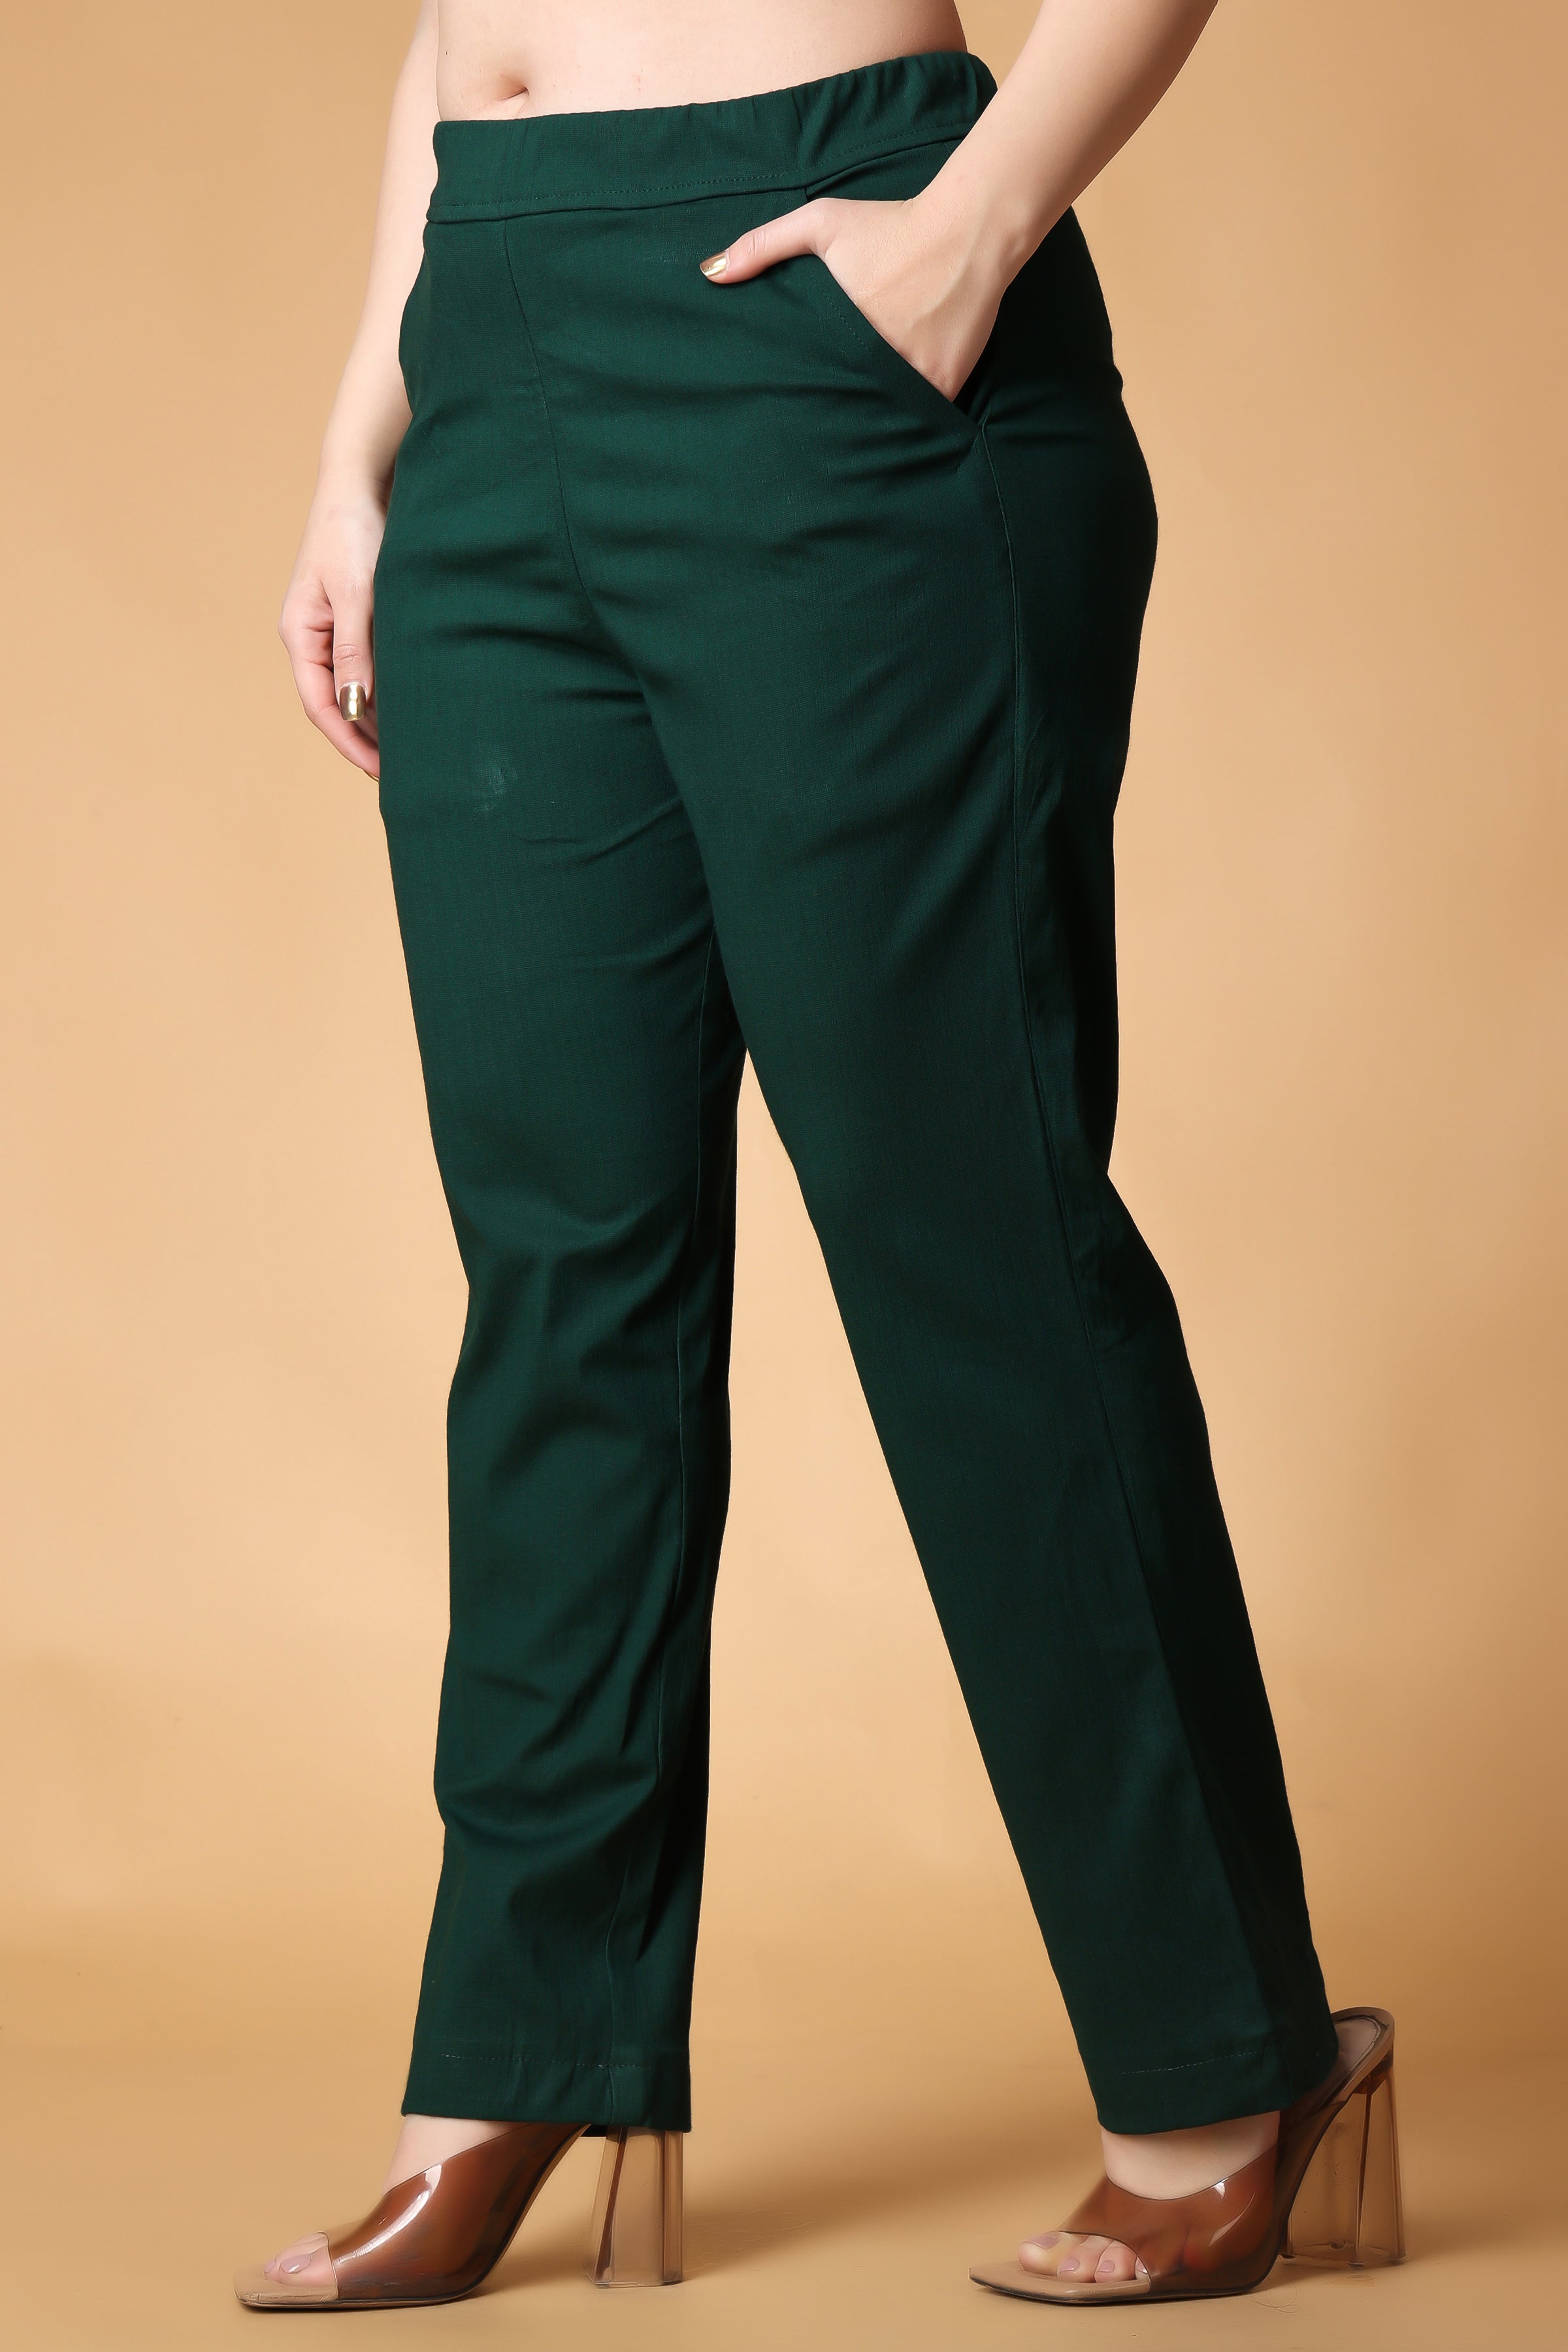 Ladies Maroon Lycra Trousers Feature  Comfortable Pattern  Plain at Rs  209  Piece in Surat